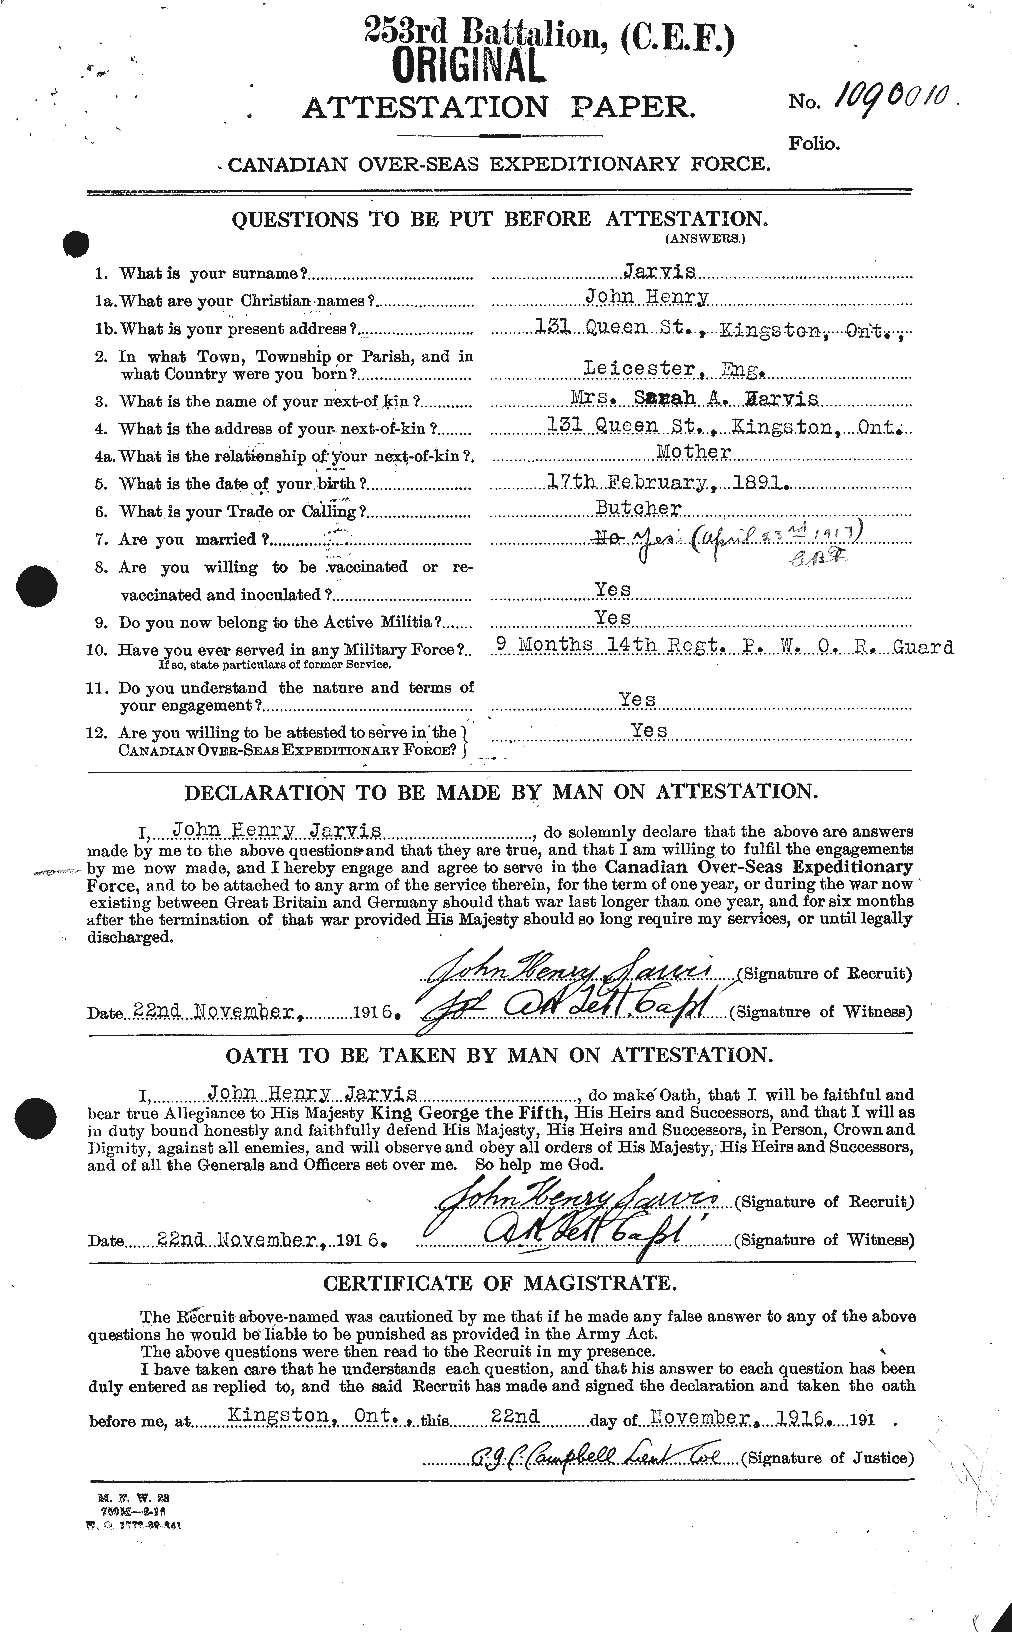 Personnel Records of the First World War - CEF 414761a